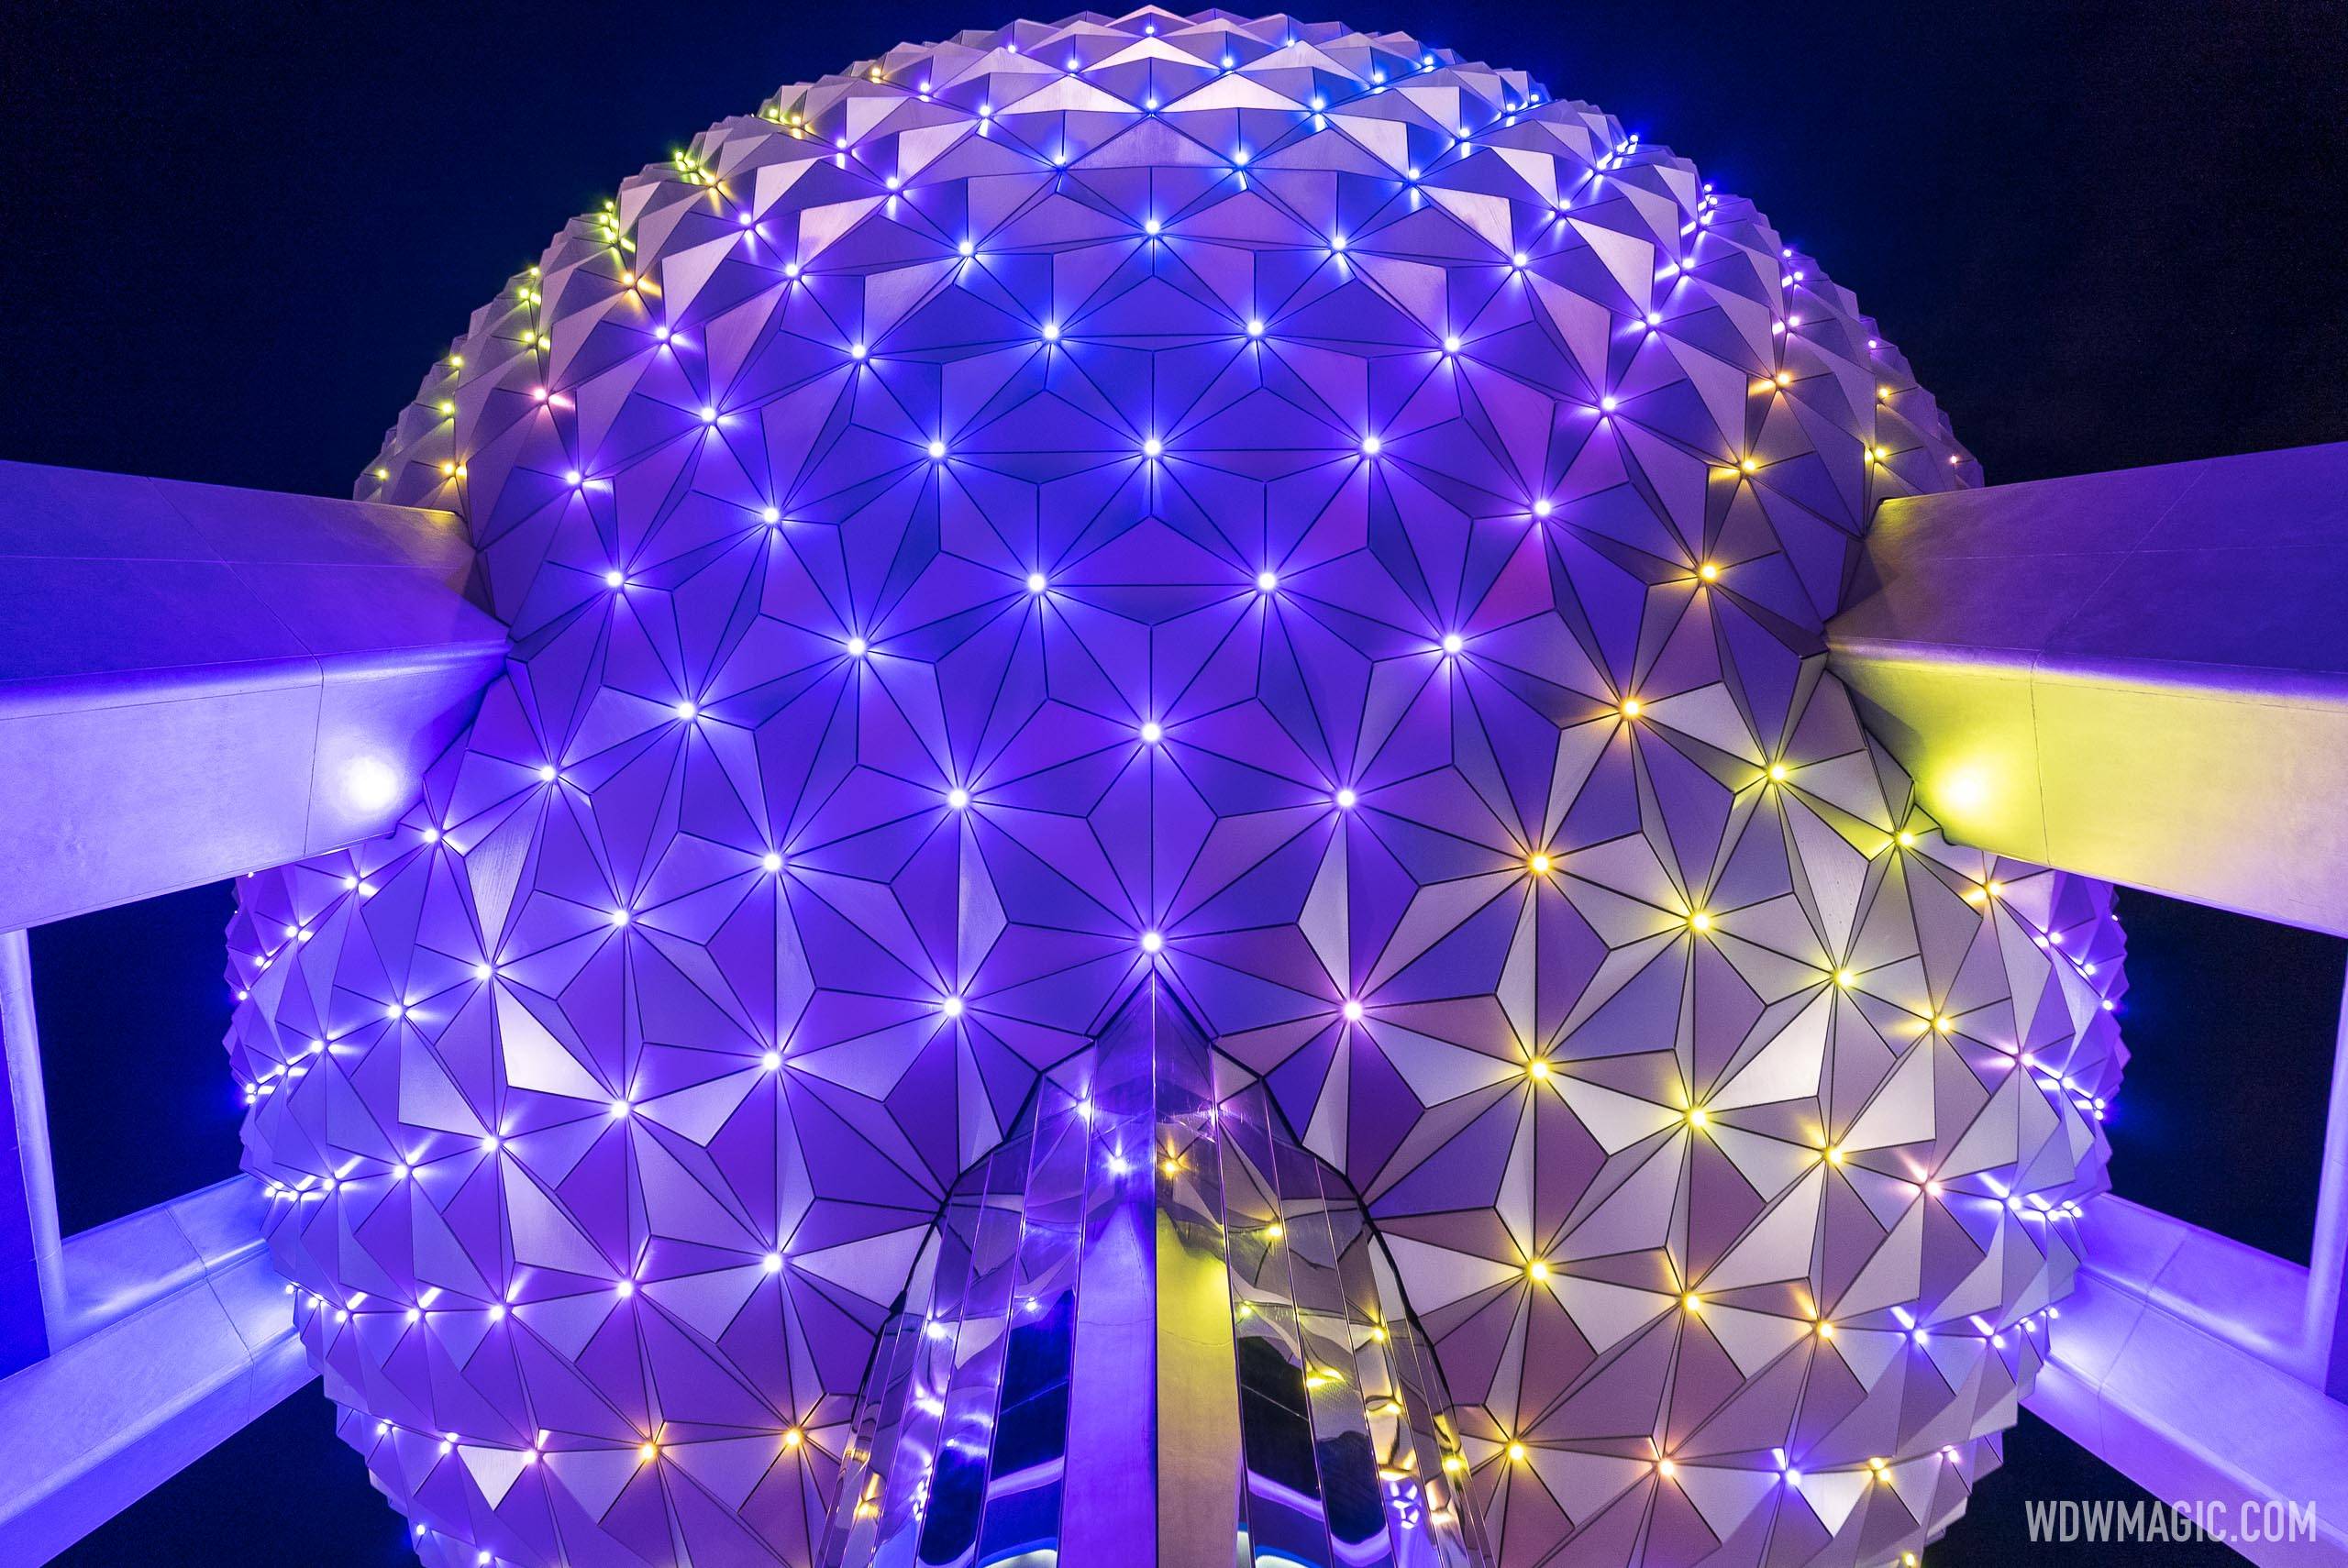 EPCOT's Spaceship Earth takes on new life after dark as a Beacon of Magic